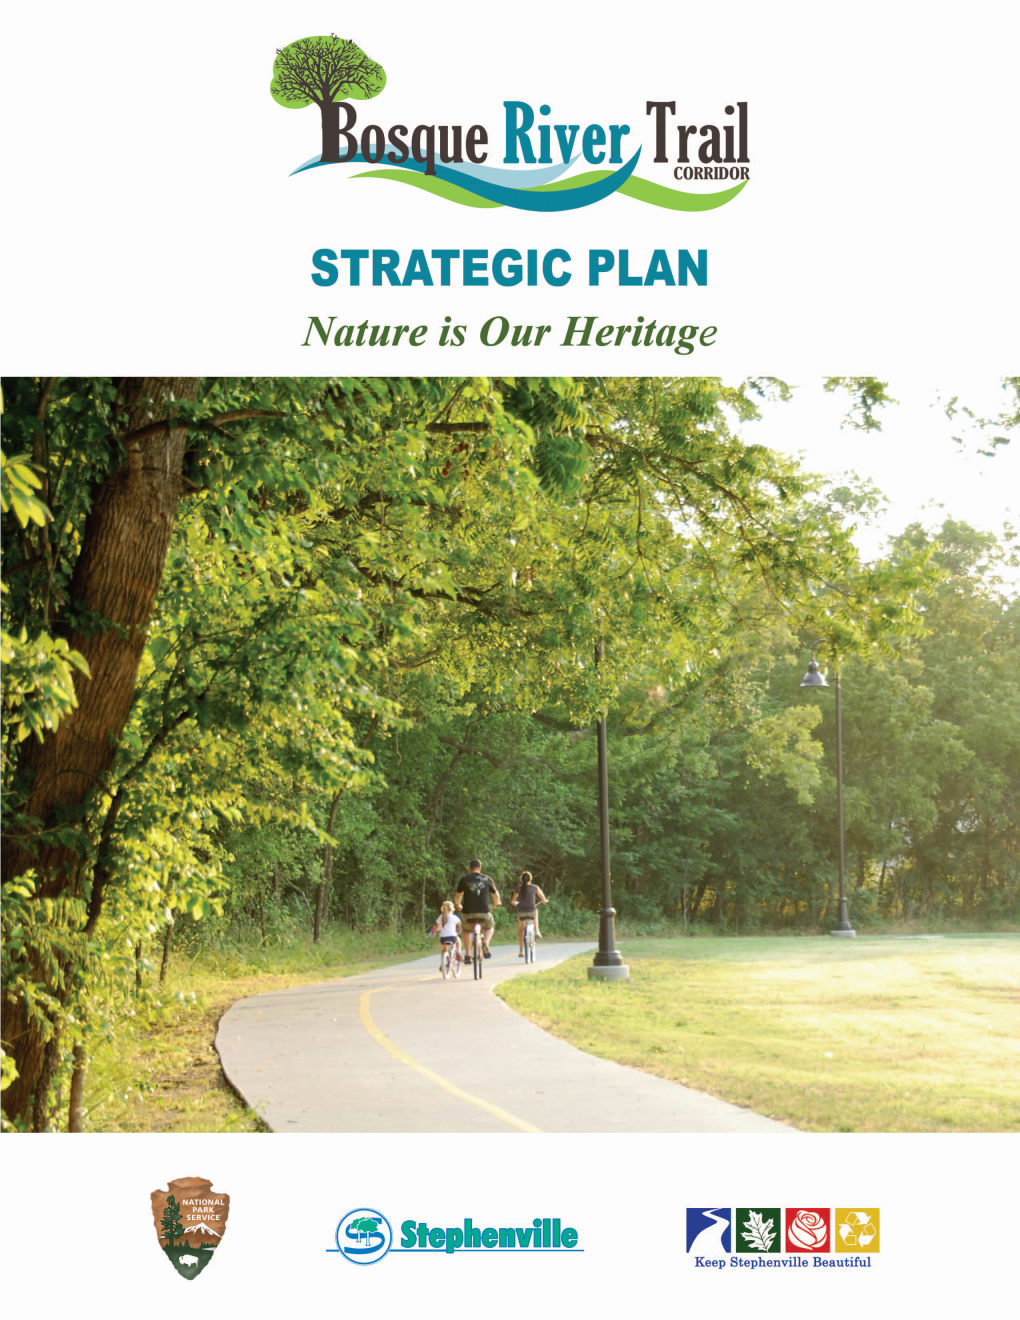 Completed Bosque River Trail Corridor Master Plan